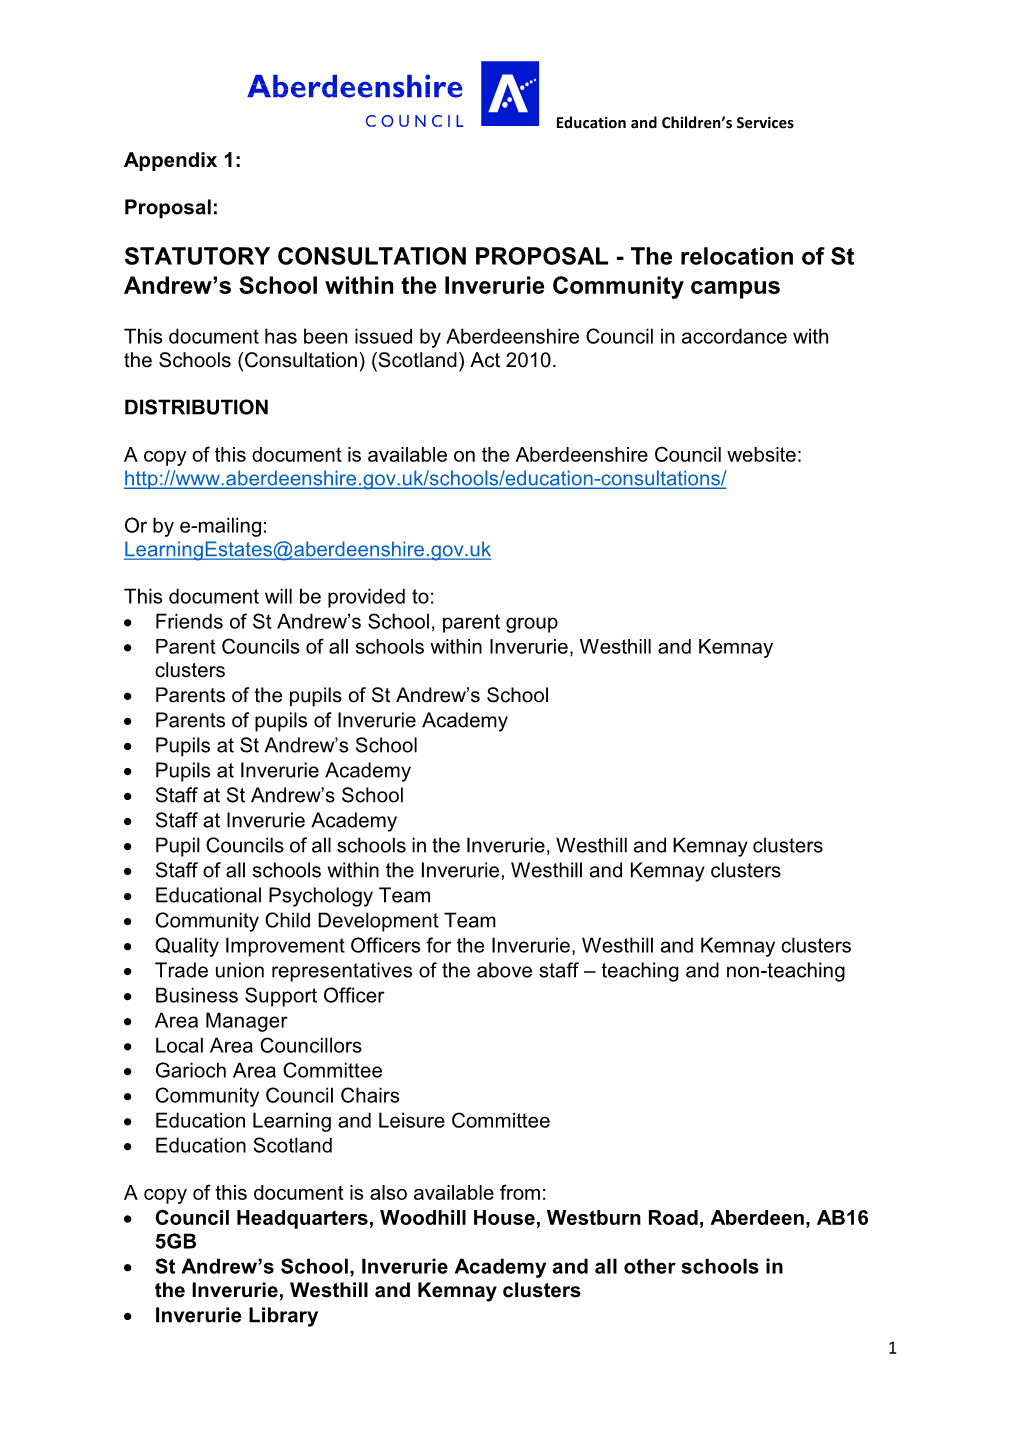 STATUTORY CONSULTATION PROPOSAL - the Relocation of St Andrew’S School Within the Inverurie Community Campus